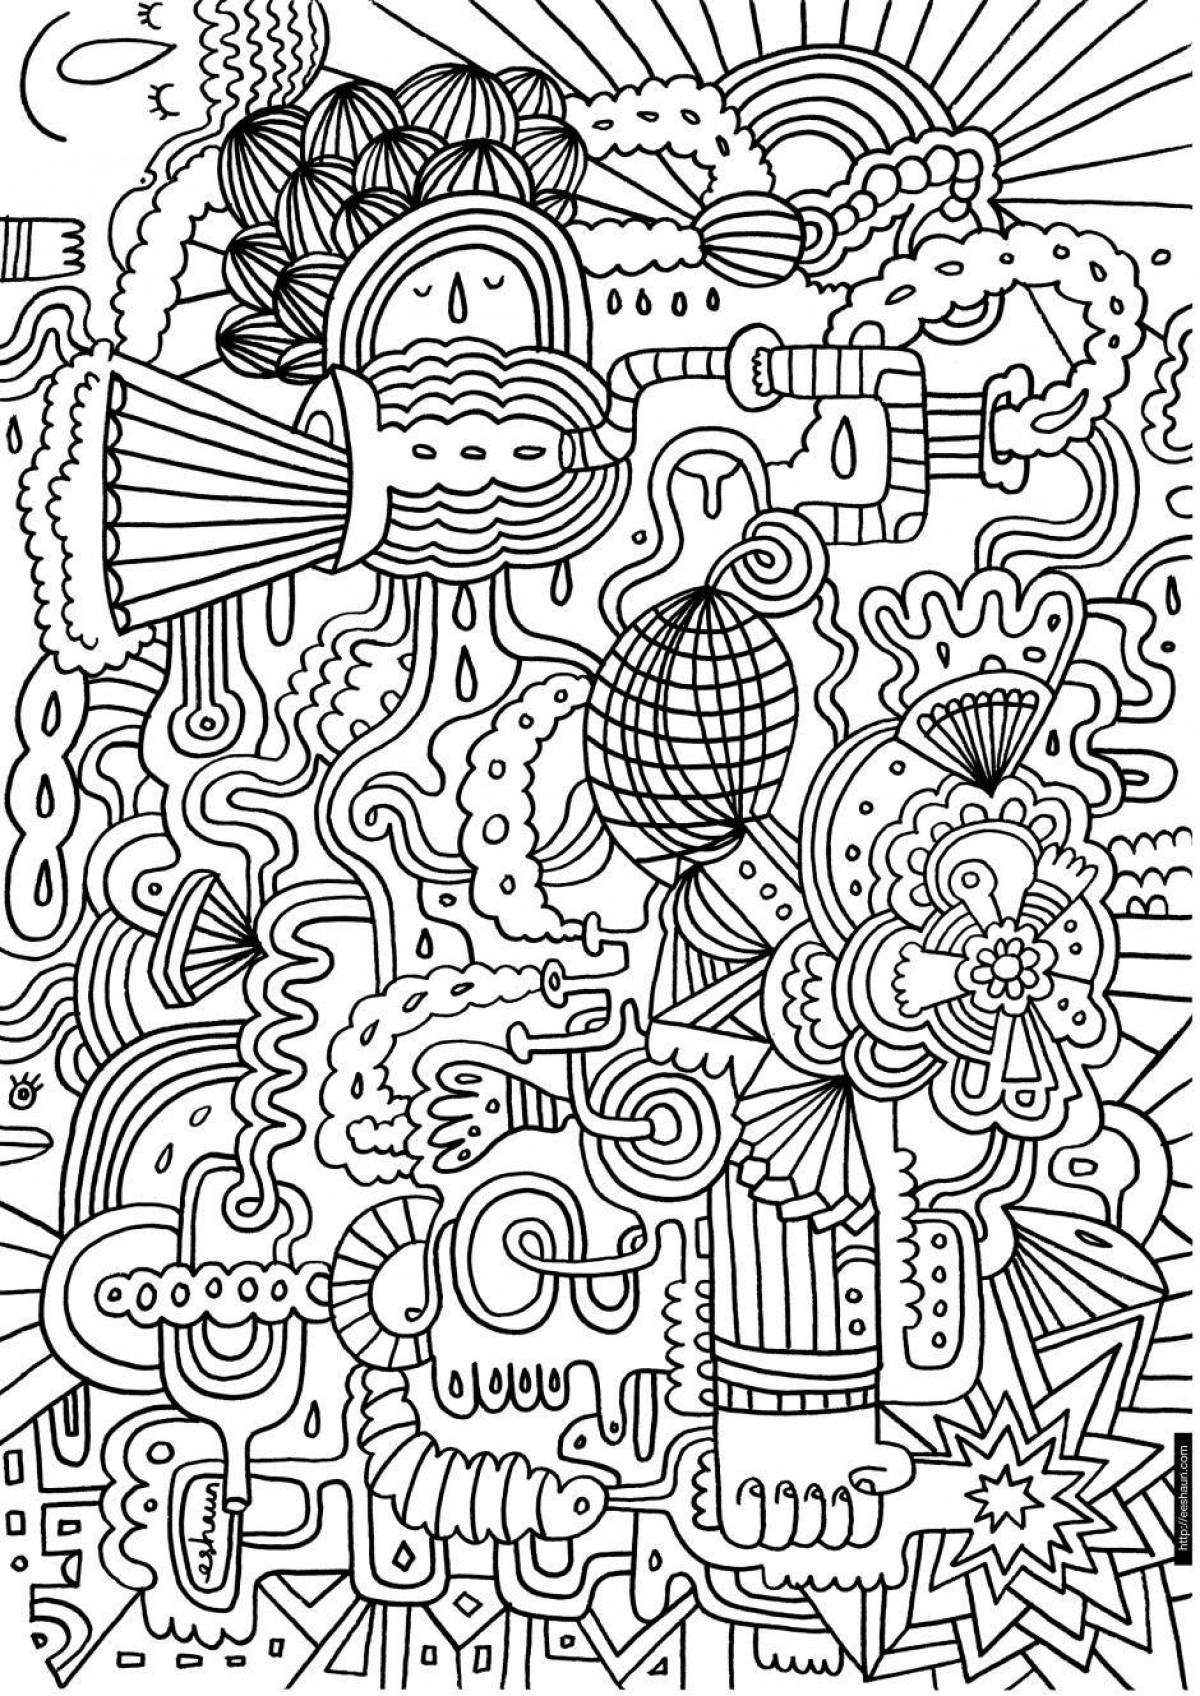 Peaceful anti-stress coloring book for teenagers